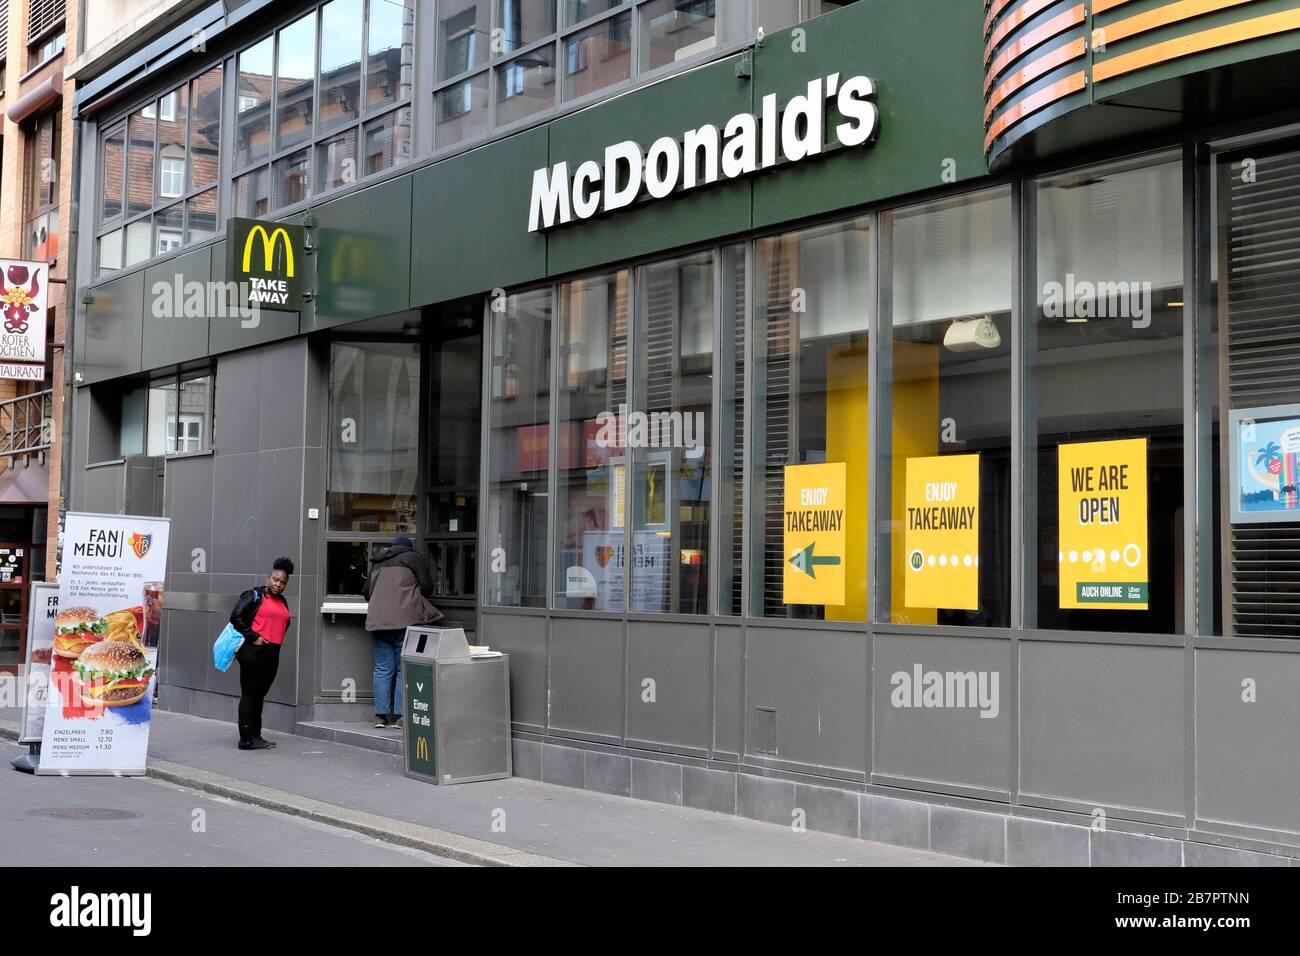 All restaurants and non essentiall shops are closed because of coronavirus. McDonalds is open for take away only. Basel, Switzerland Stock Photo